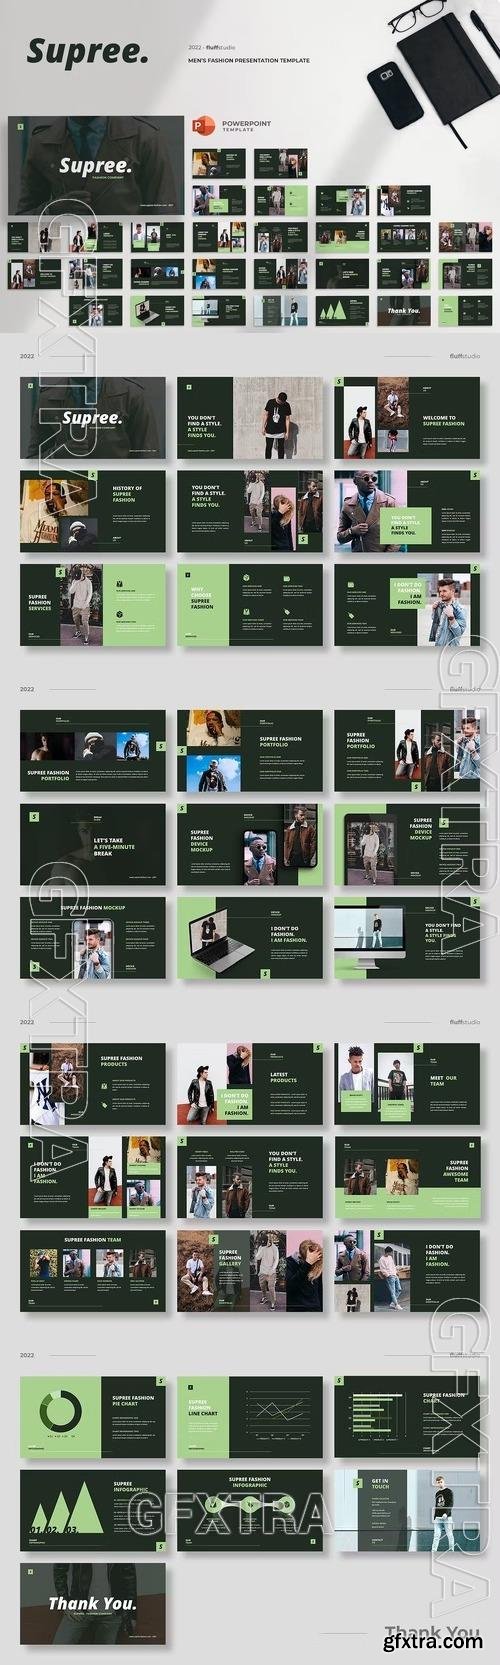 Supree - Men\'s Fashion Powerpoint Template BYRLHCJ